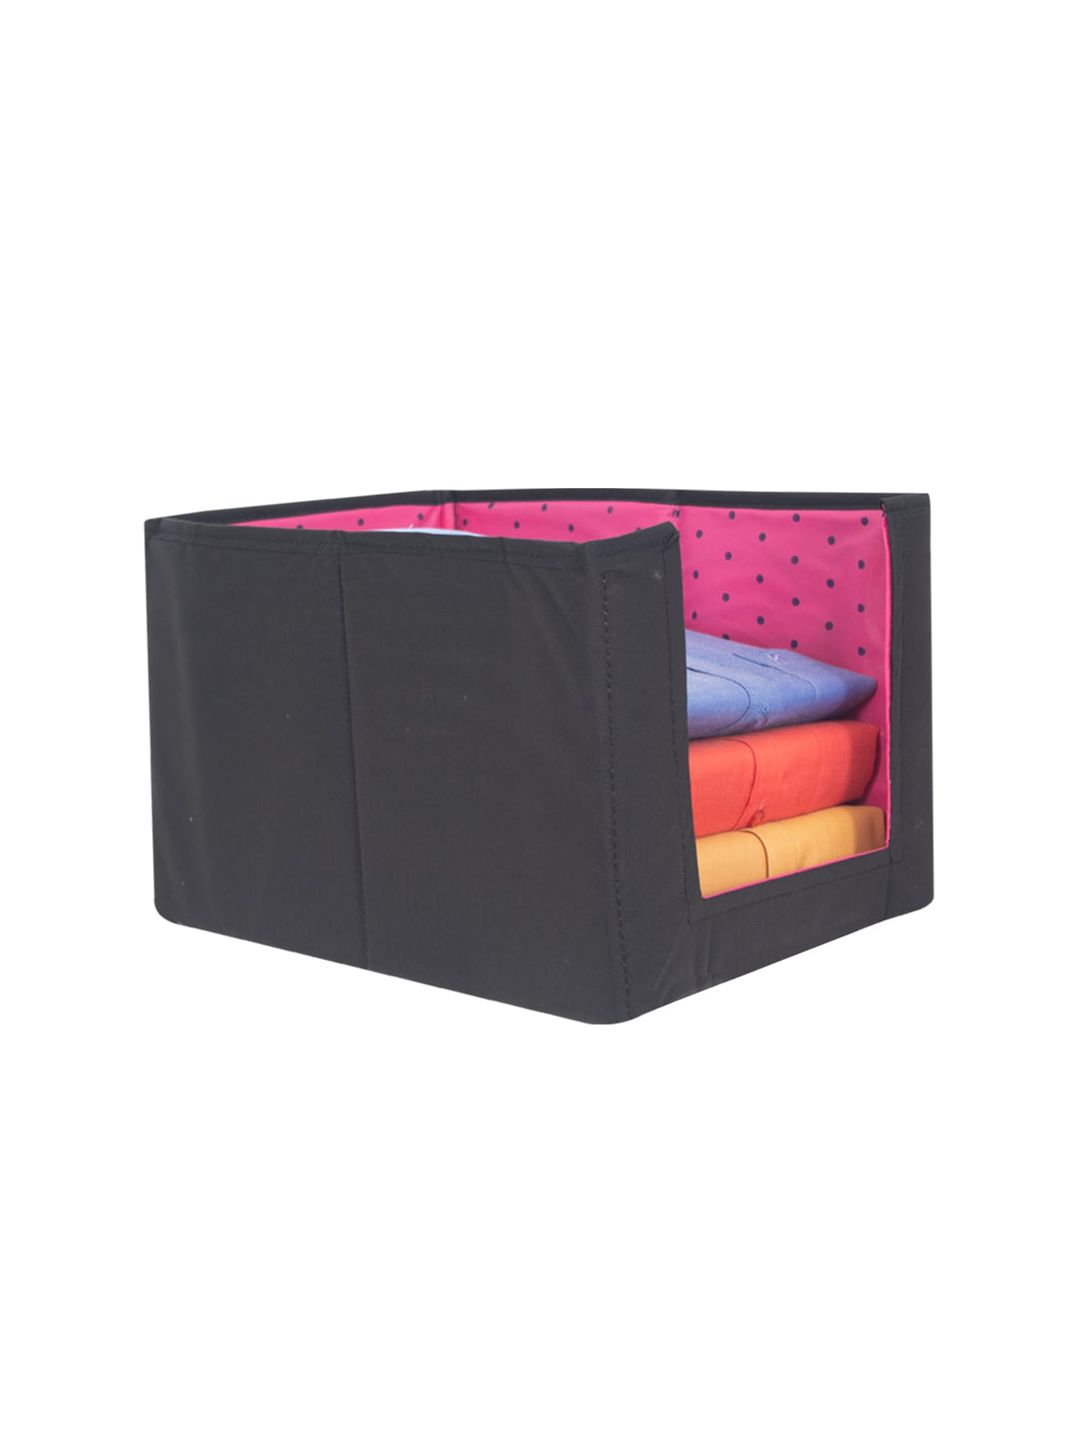 prettykrafts Pink & Black Solid Shirt Stacker Organizer With Handles Price in India